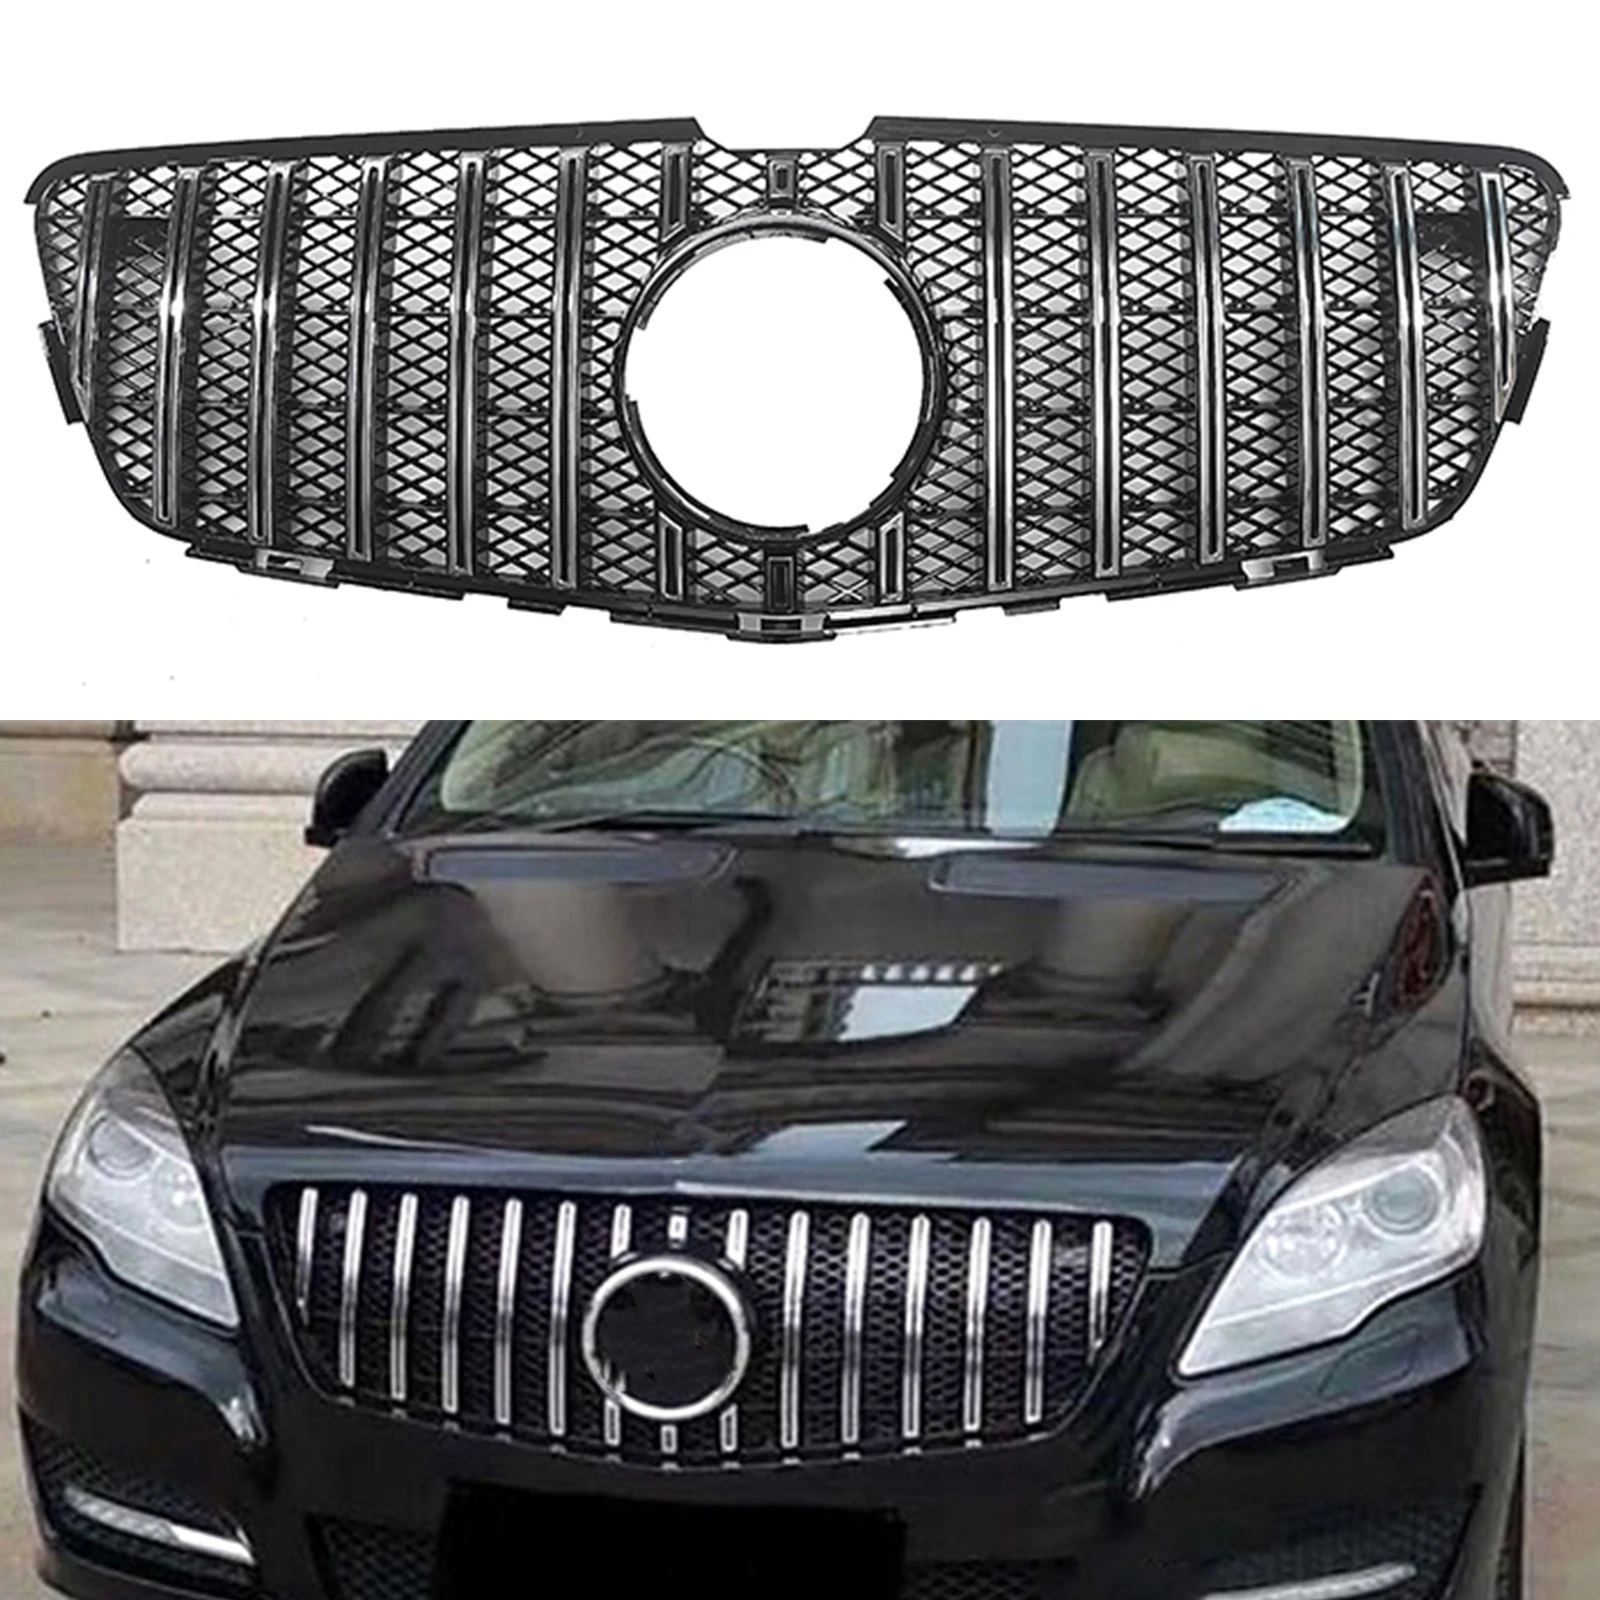 

Front Grille For Mercedes-Benz R-Class W251 2011 2012 2013 2014 2015 2016 2017 R350 GT Silver/Black Upper Bumper Hood Mesh Grill